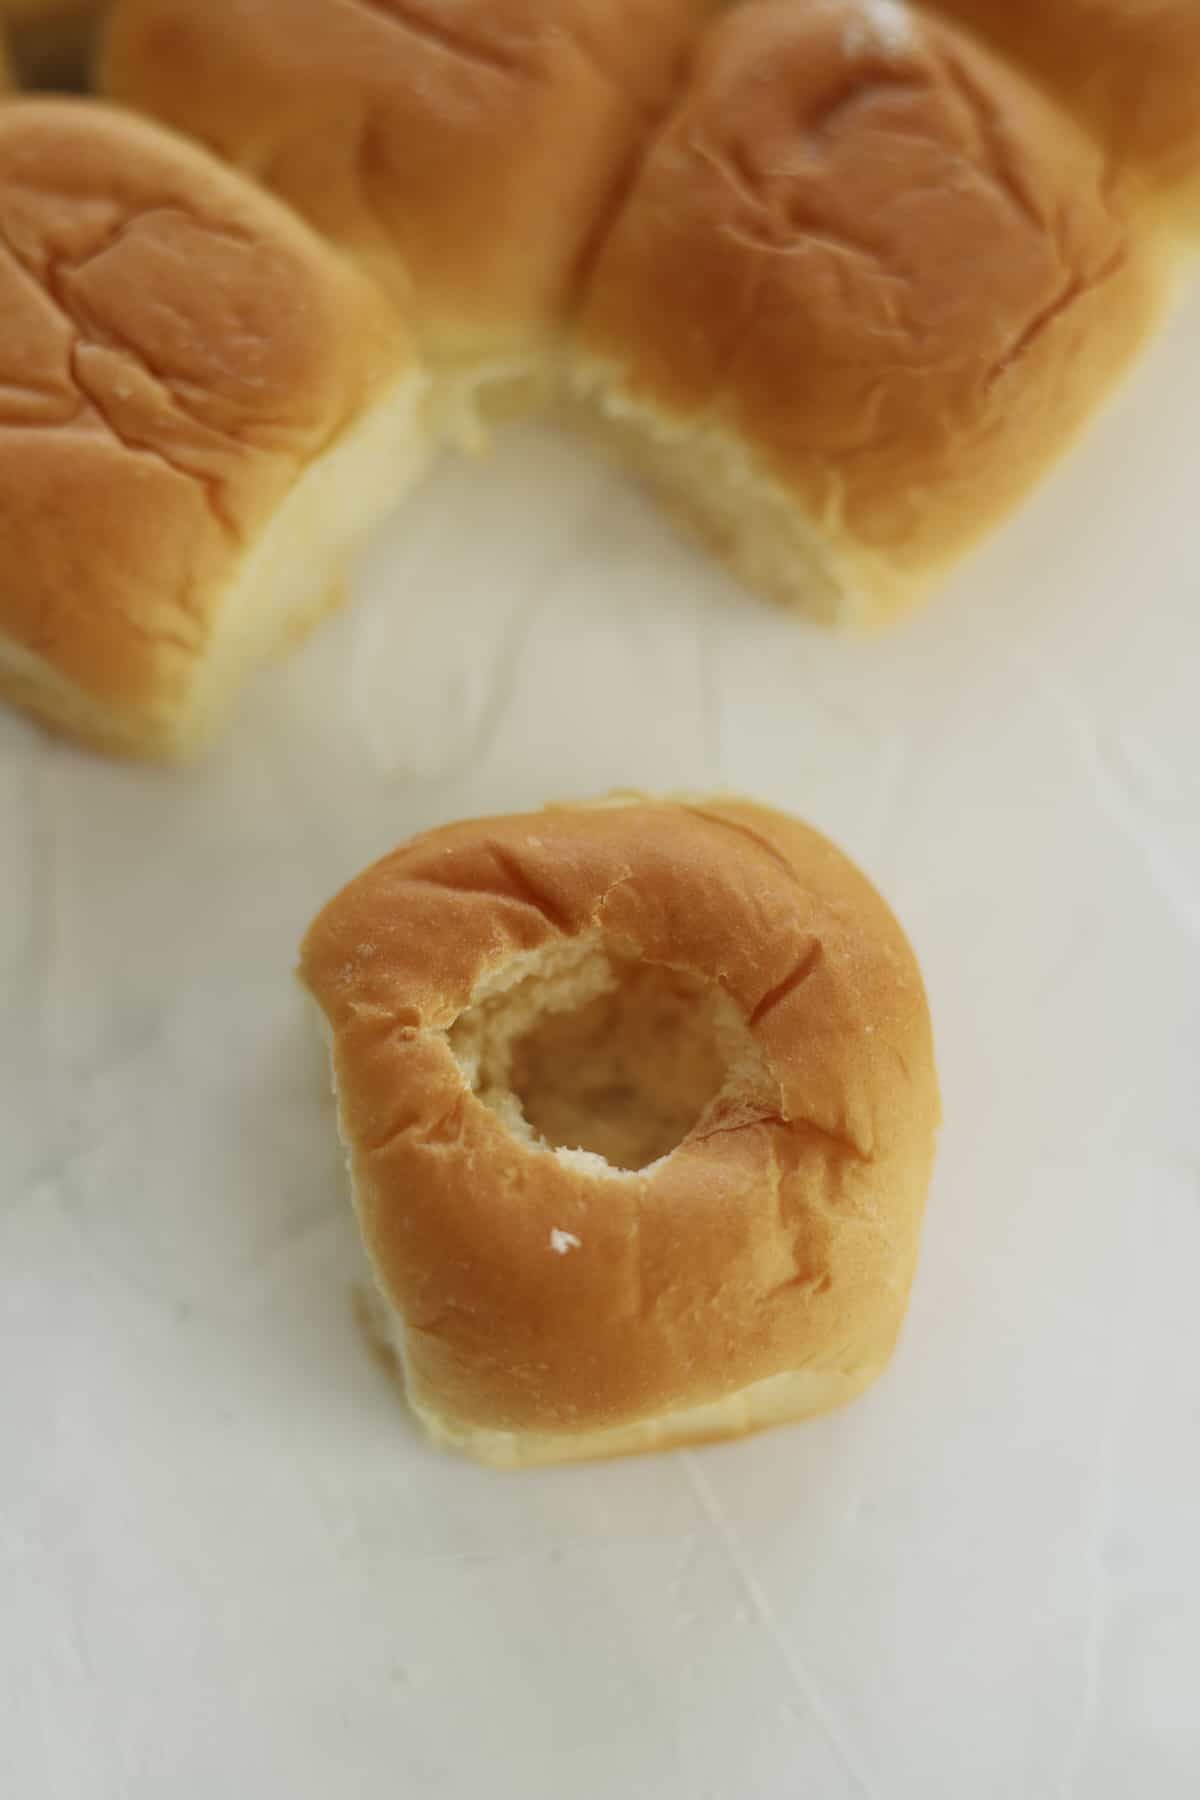 Hawaiian rolls, one with a hole poked into the center